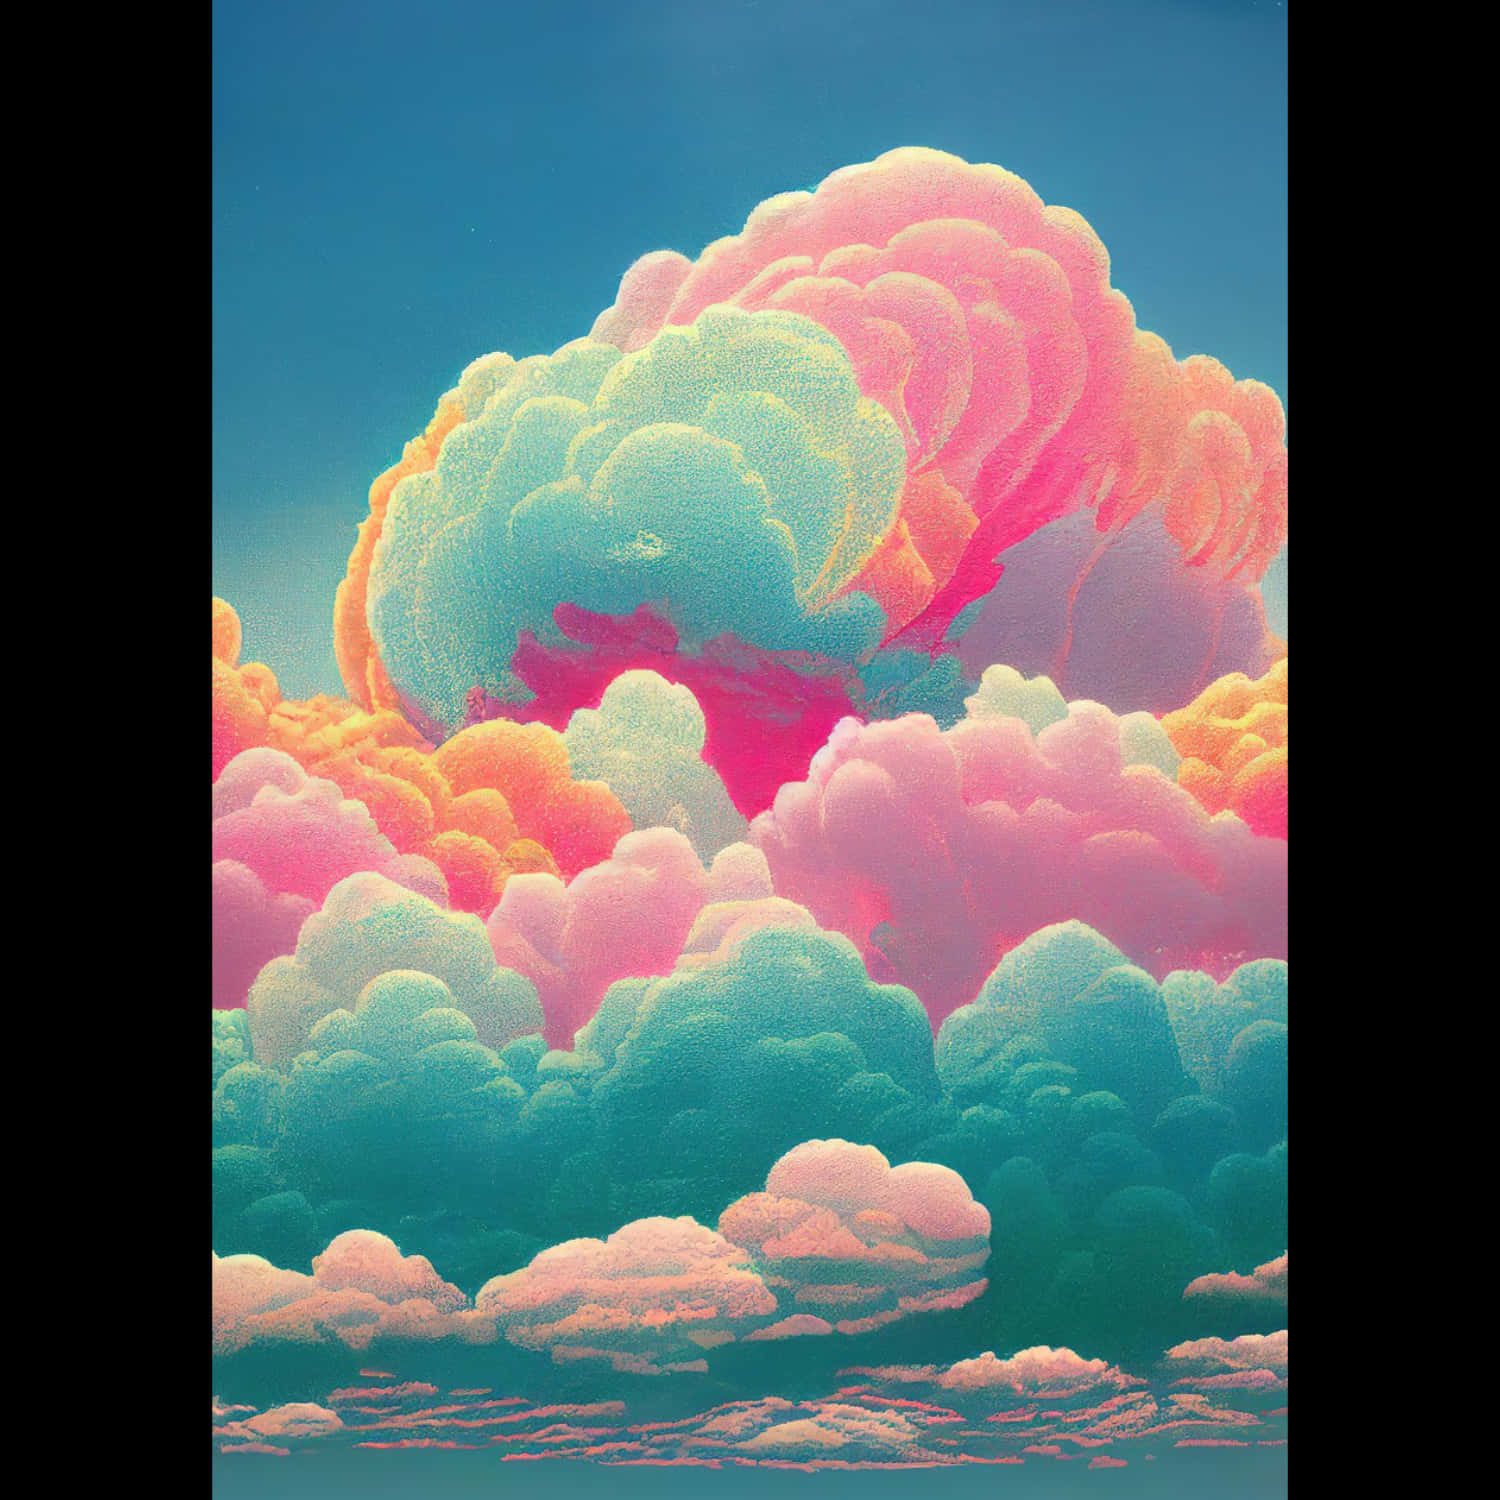 Cotton Candy Trippy Aesthetic Clouds Wallpaper